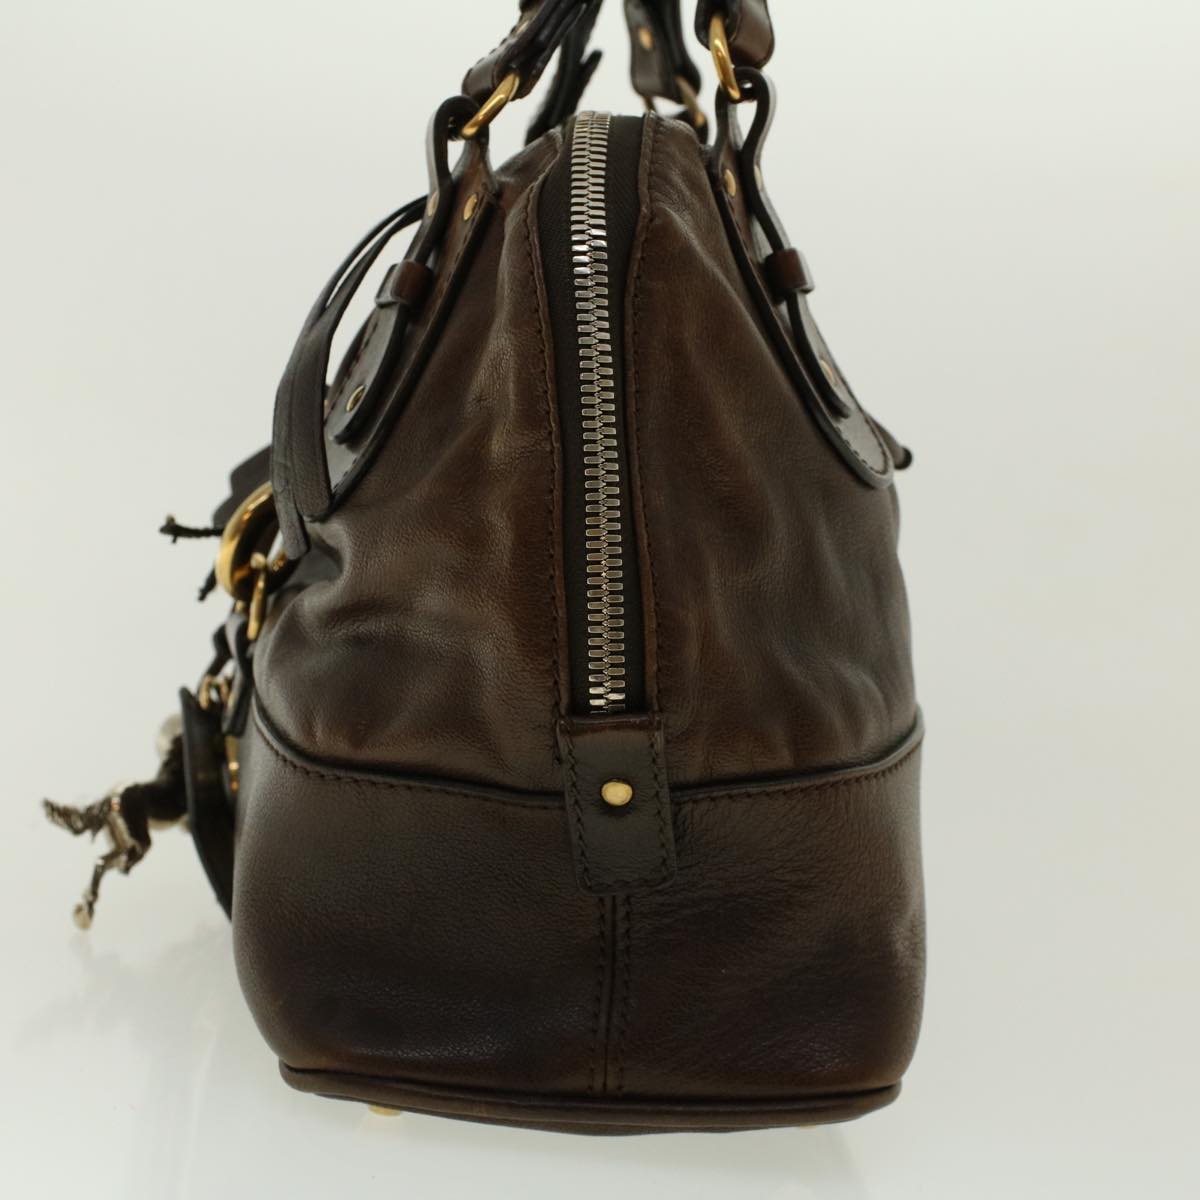 Chloe Hand Bag Leather Brown 01-08-51-5267 Auth bs5116